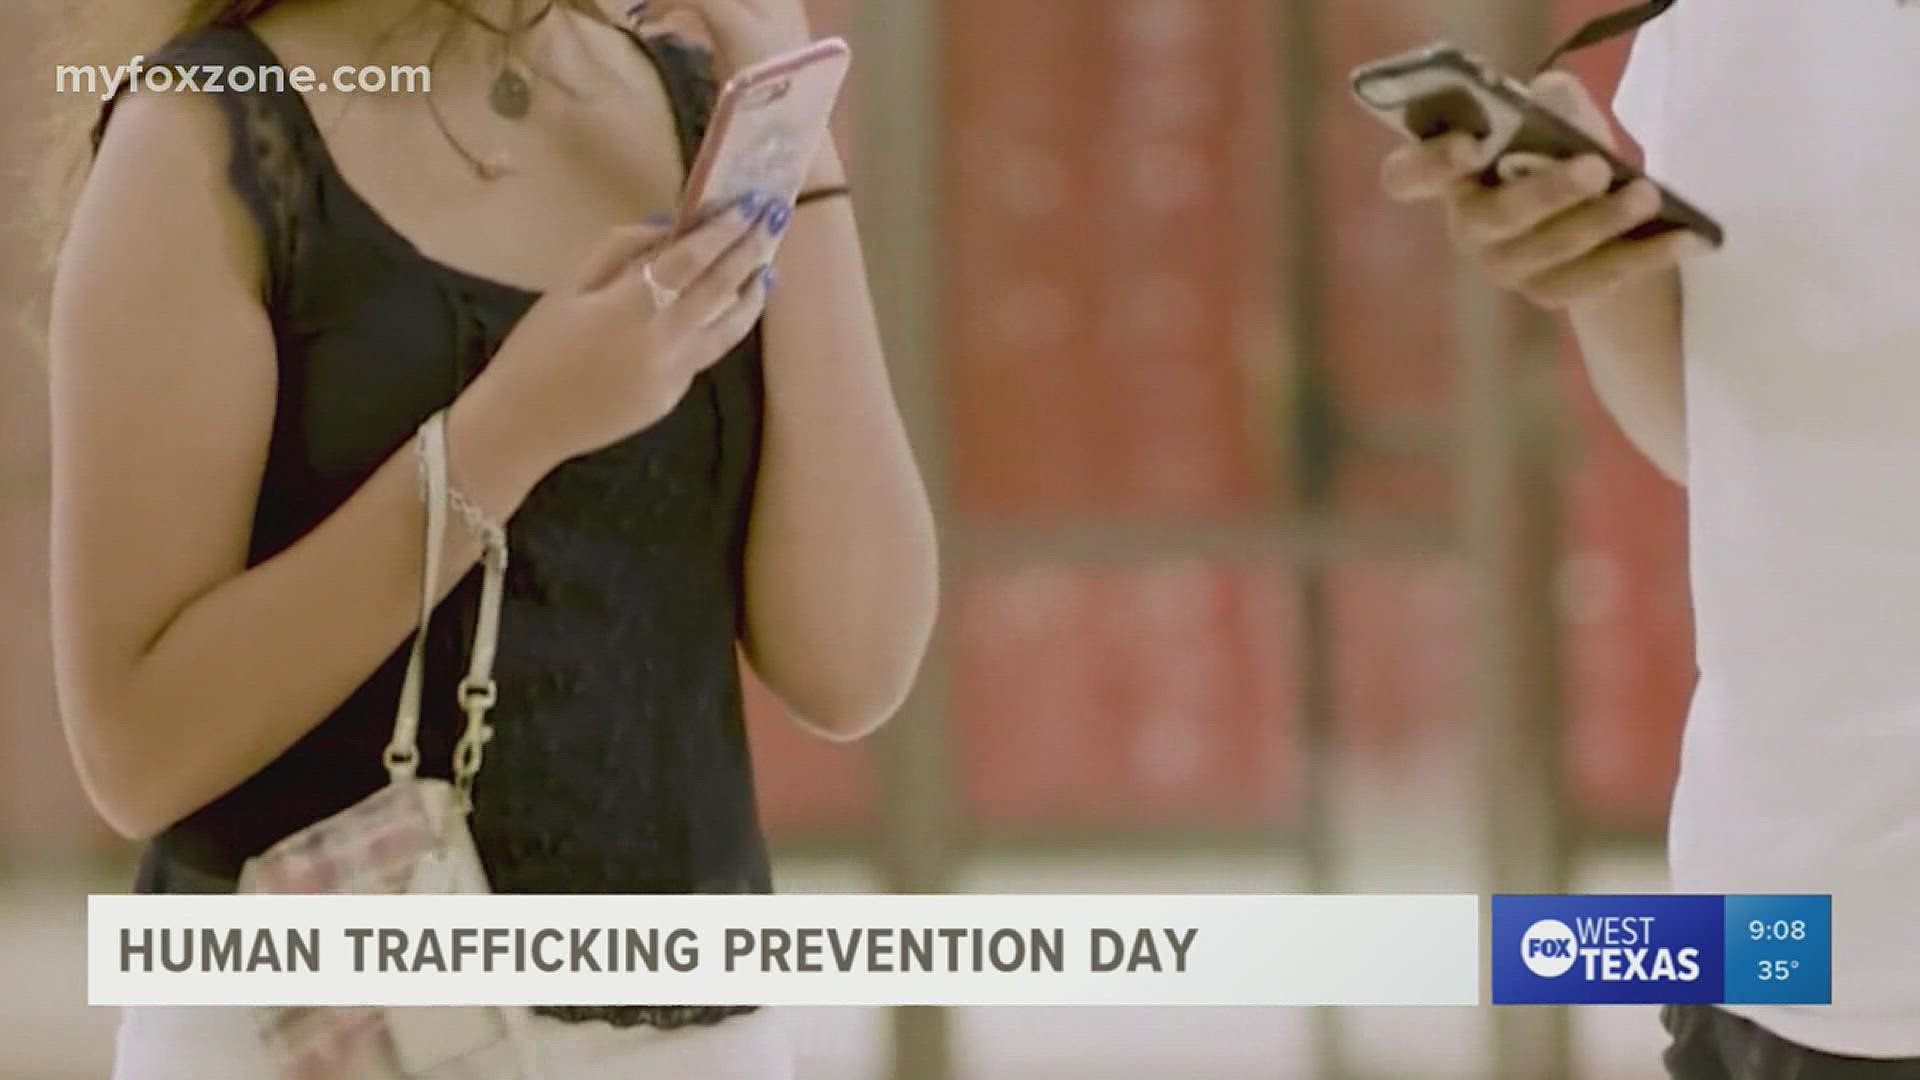 Organizations across the country come together Jan. 11 to fight against human trafficking.